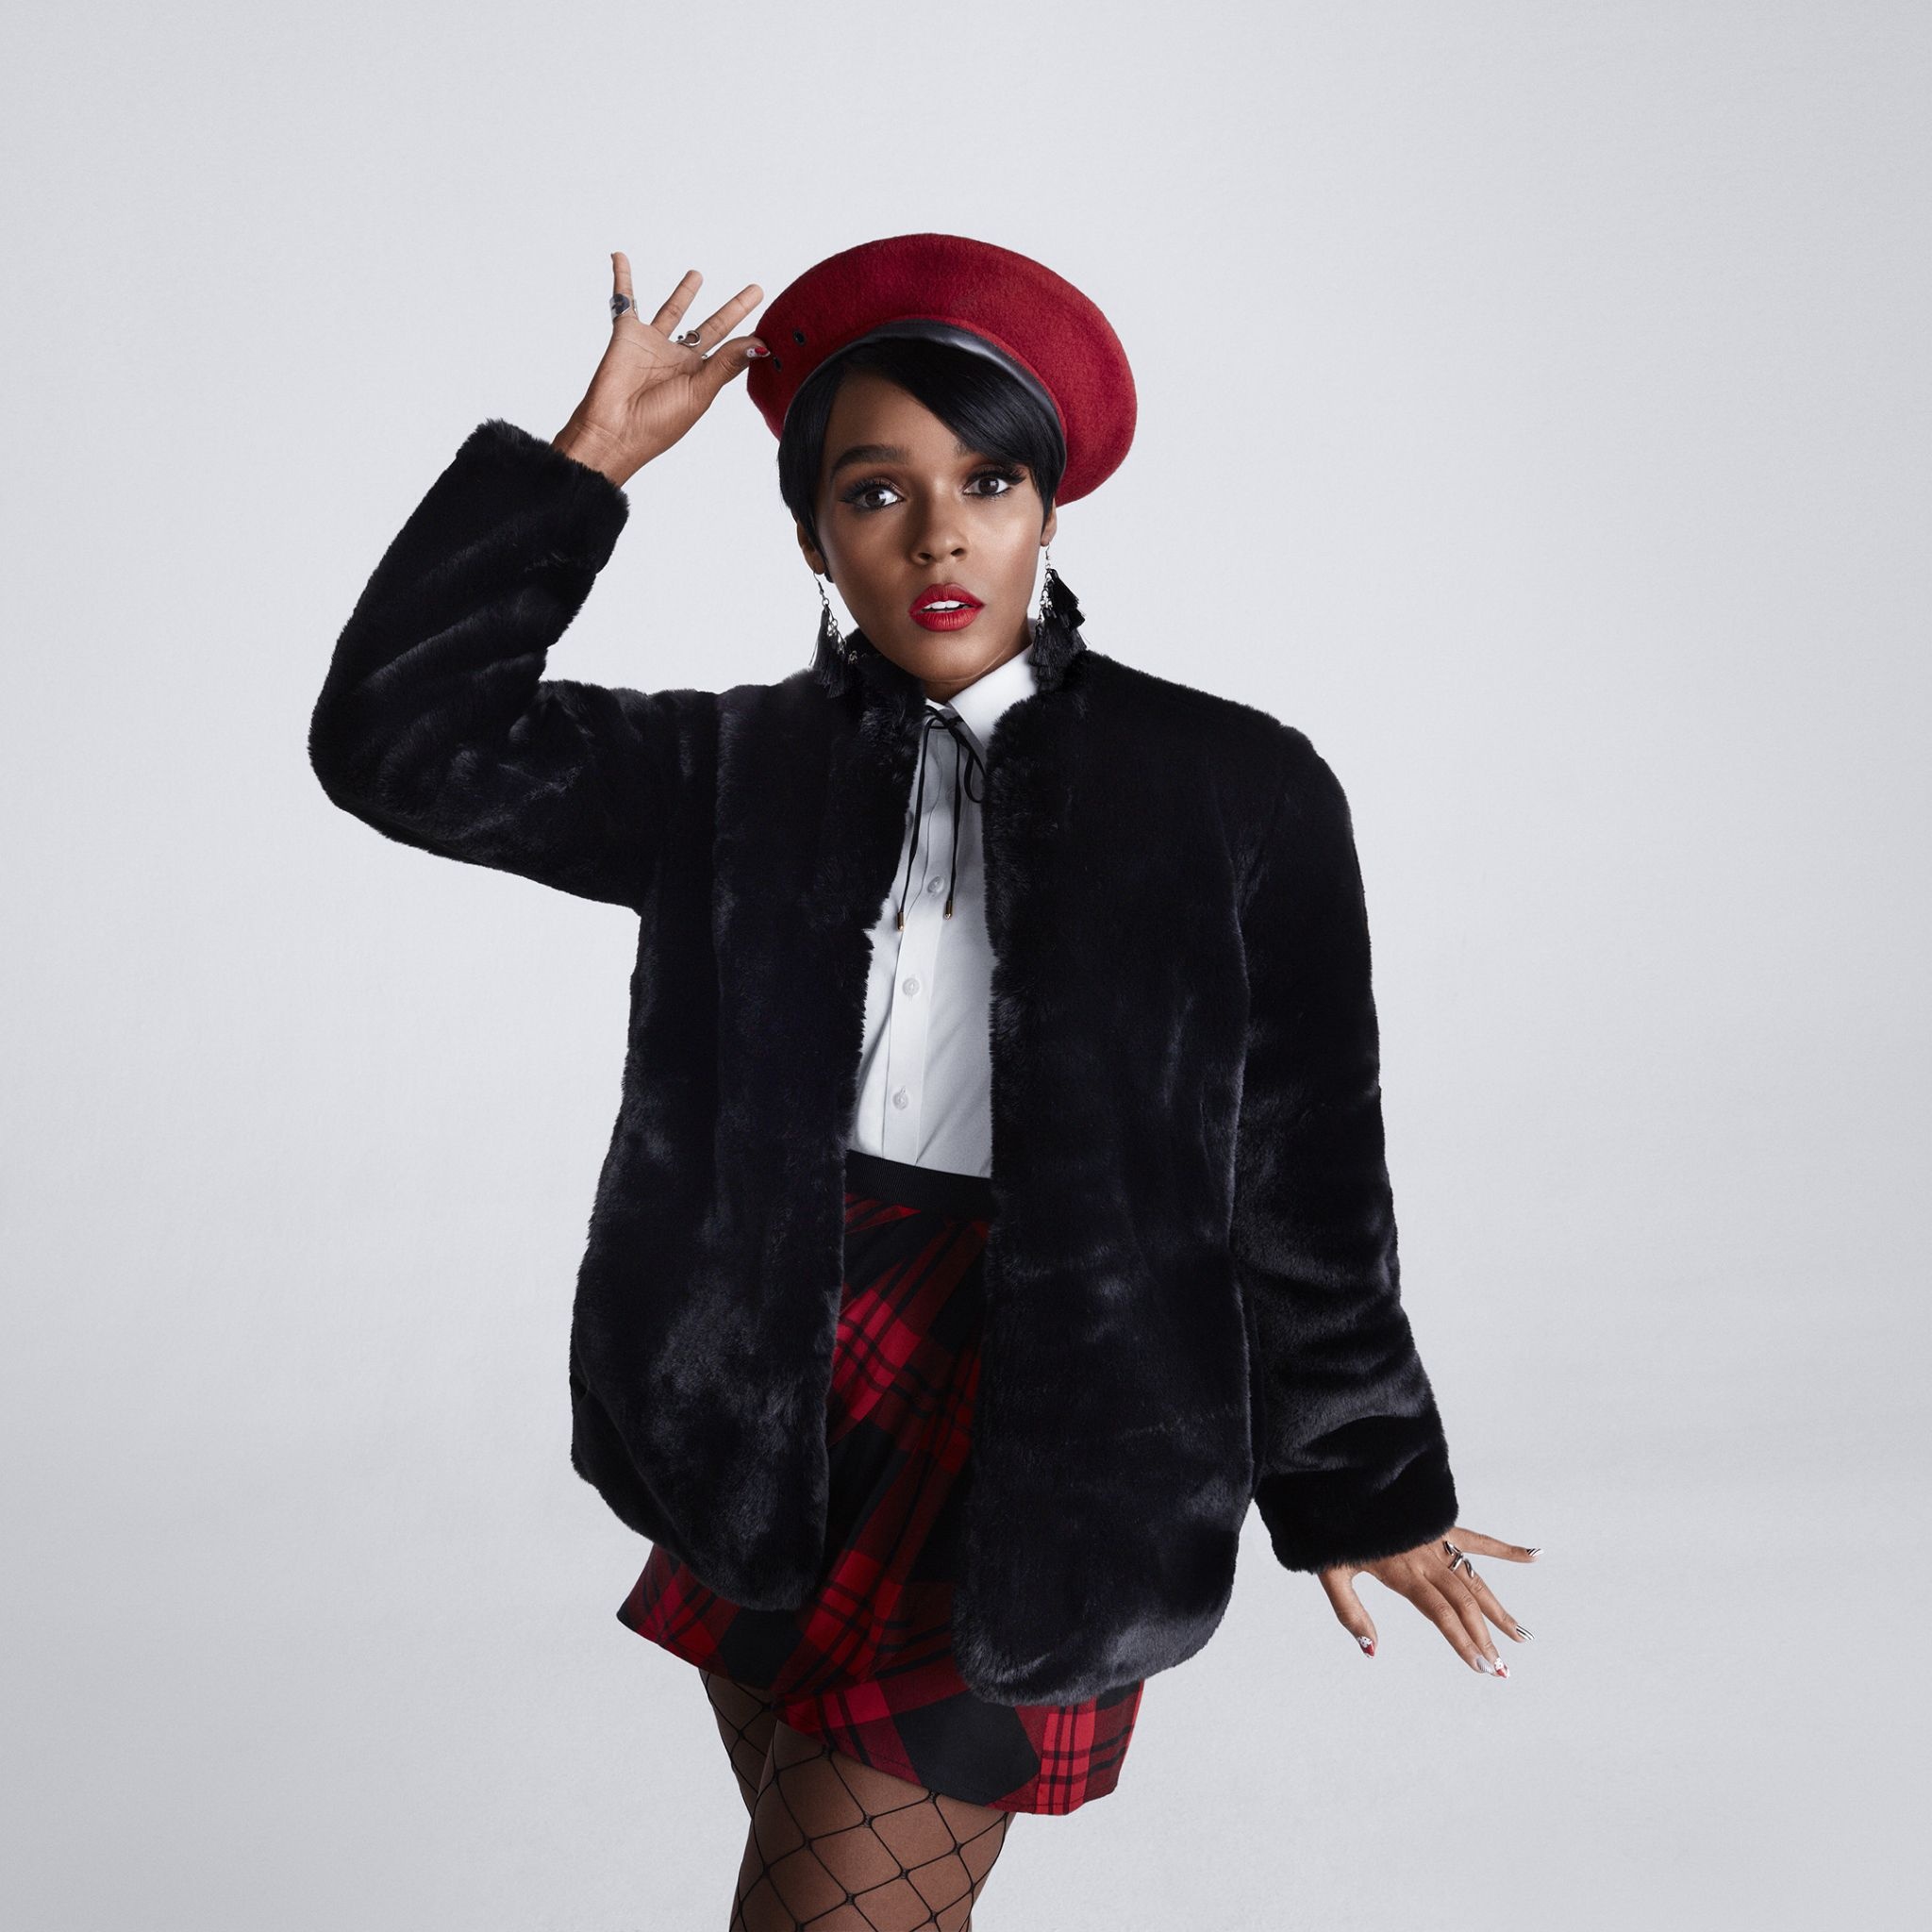 Janelle Monae creative wallpapers backgrounds, 2050x2050 HD Phone